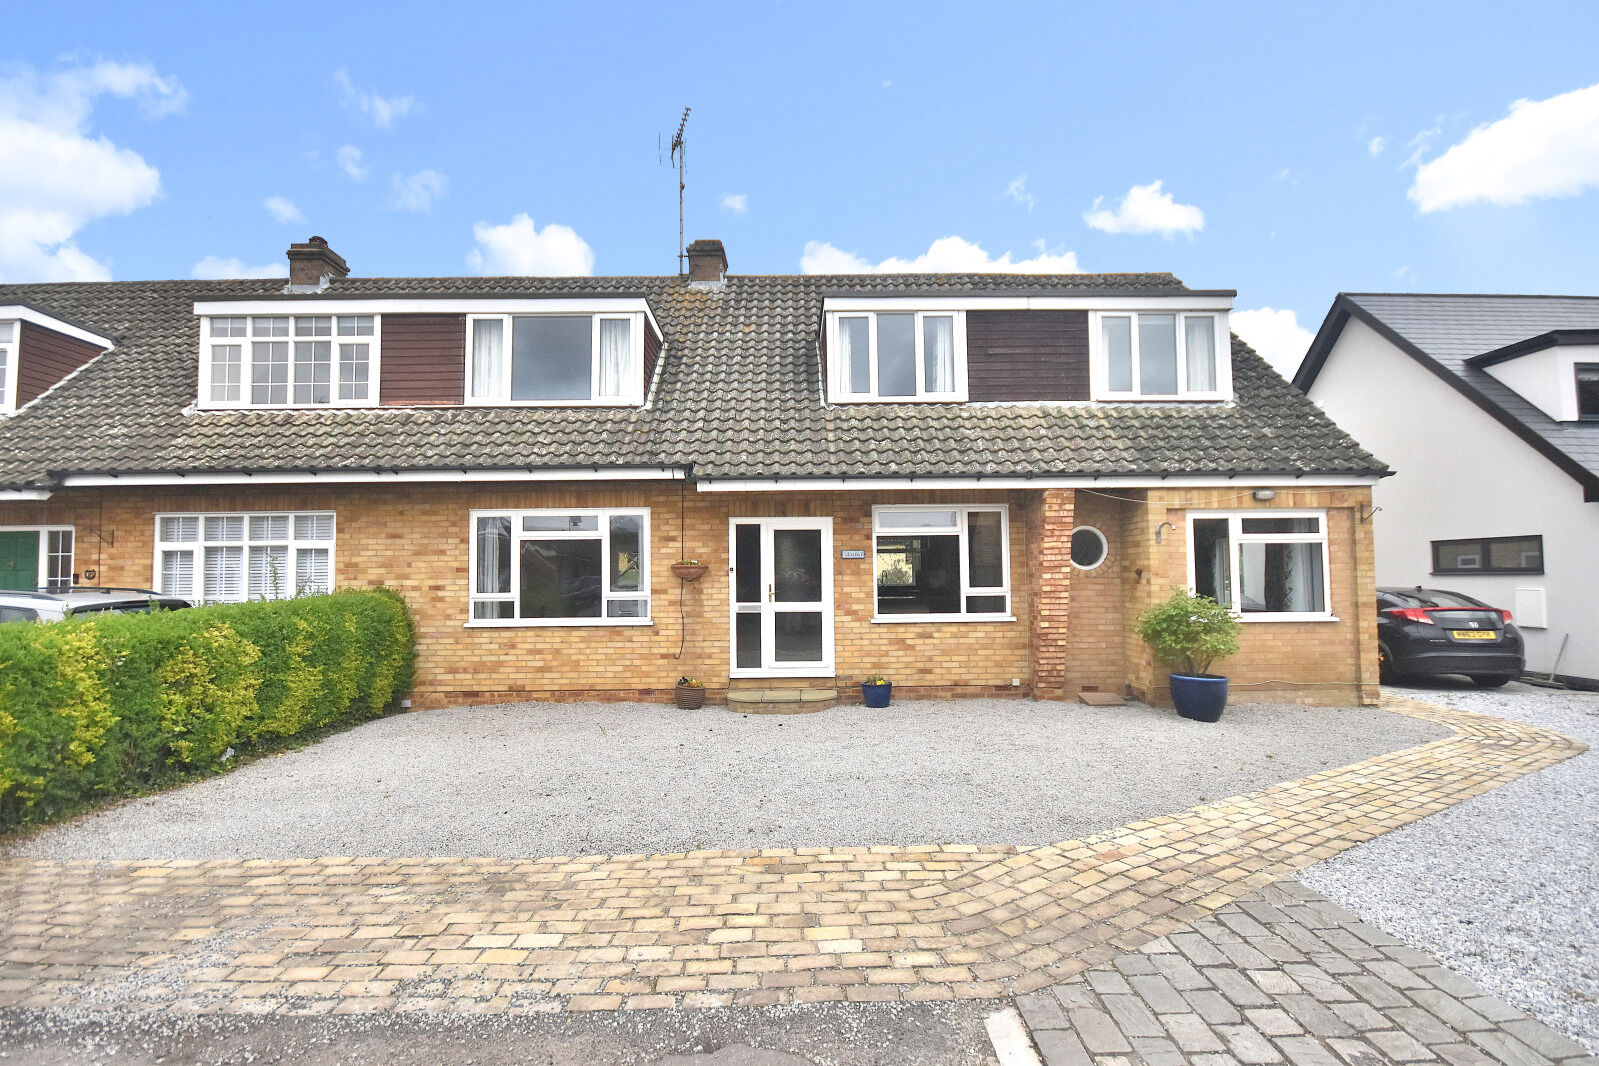 4 bedroom semi detached house to rent, Available now Bradley Common, Birchanger, CM23, main image